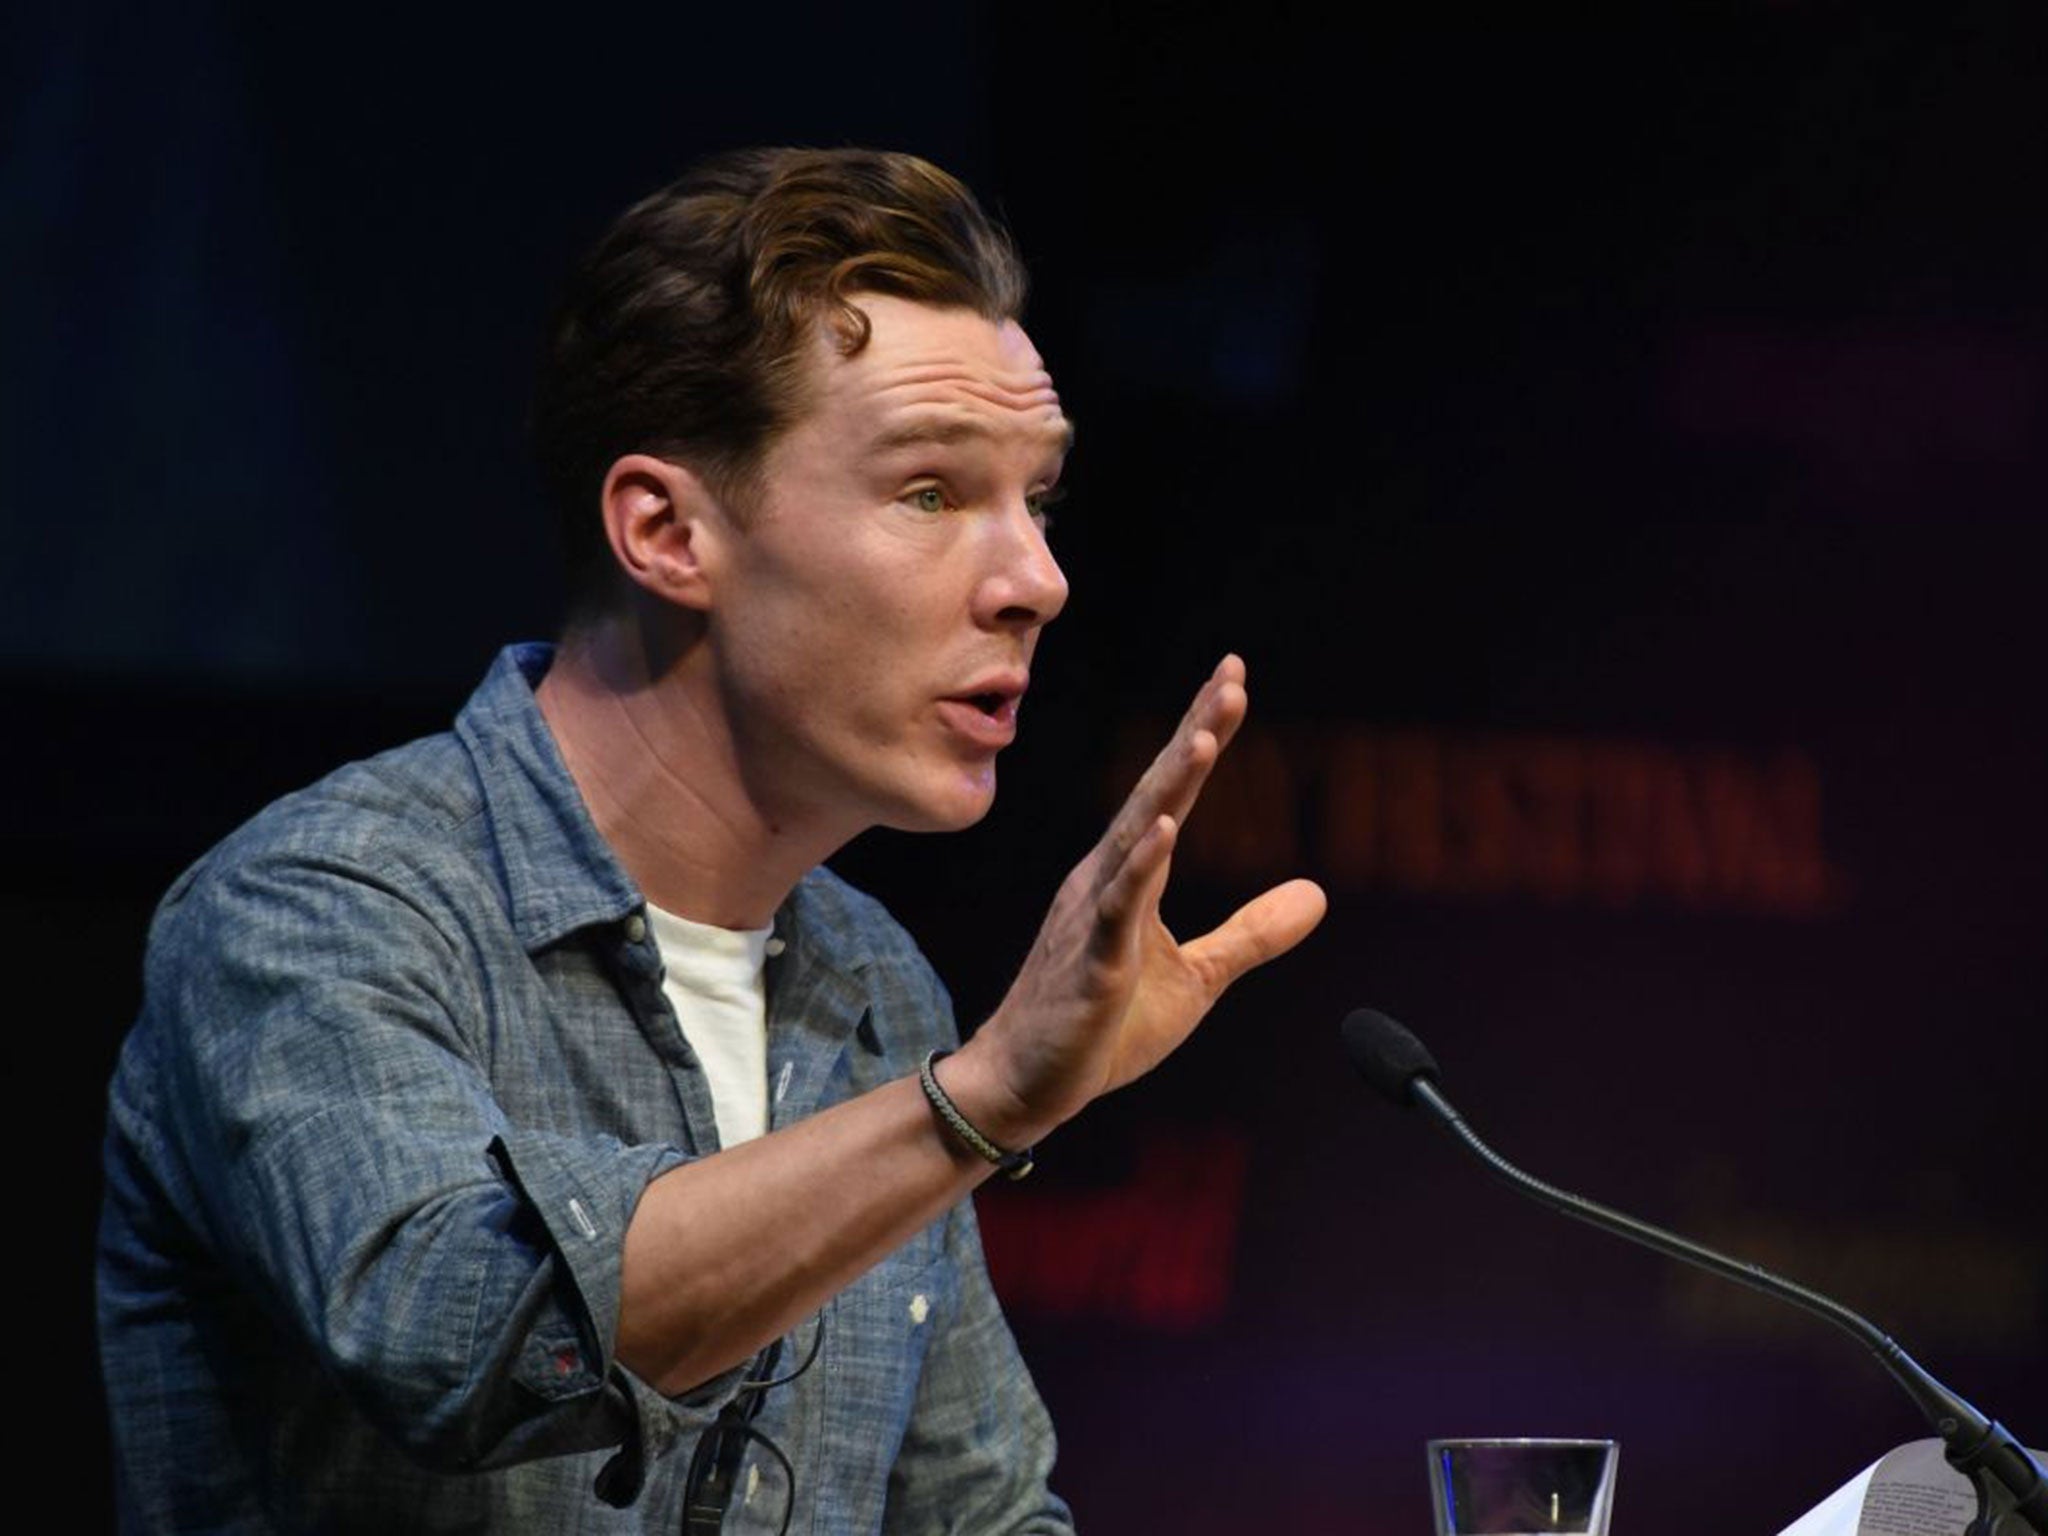 Benedict Cumberbatch performing at Letters Live during the 2014 Hay Festival